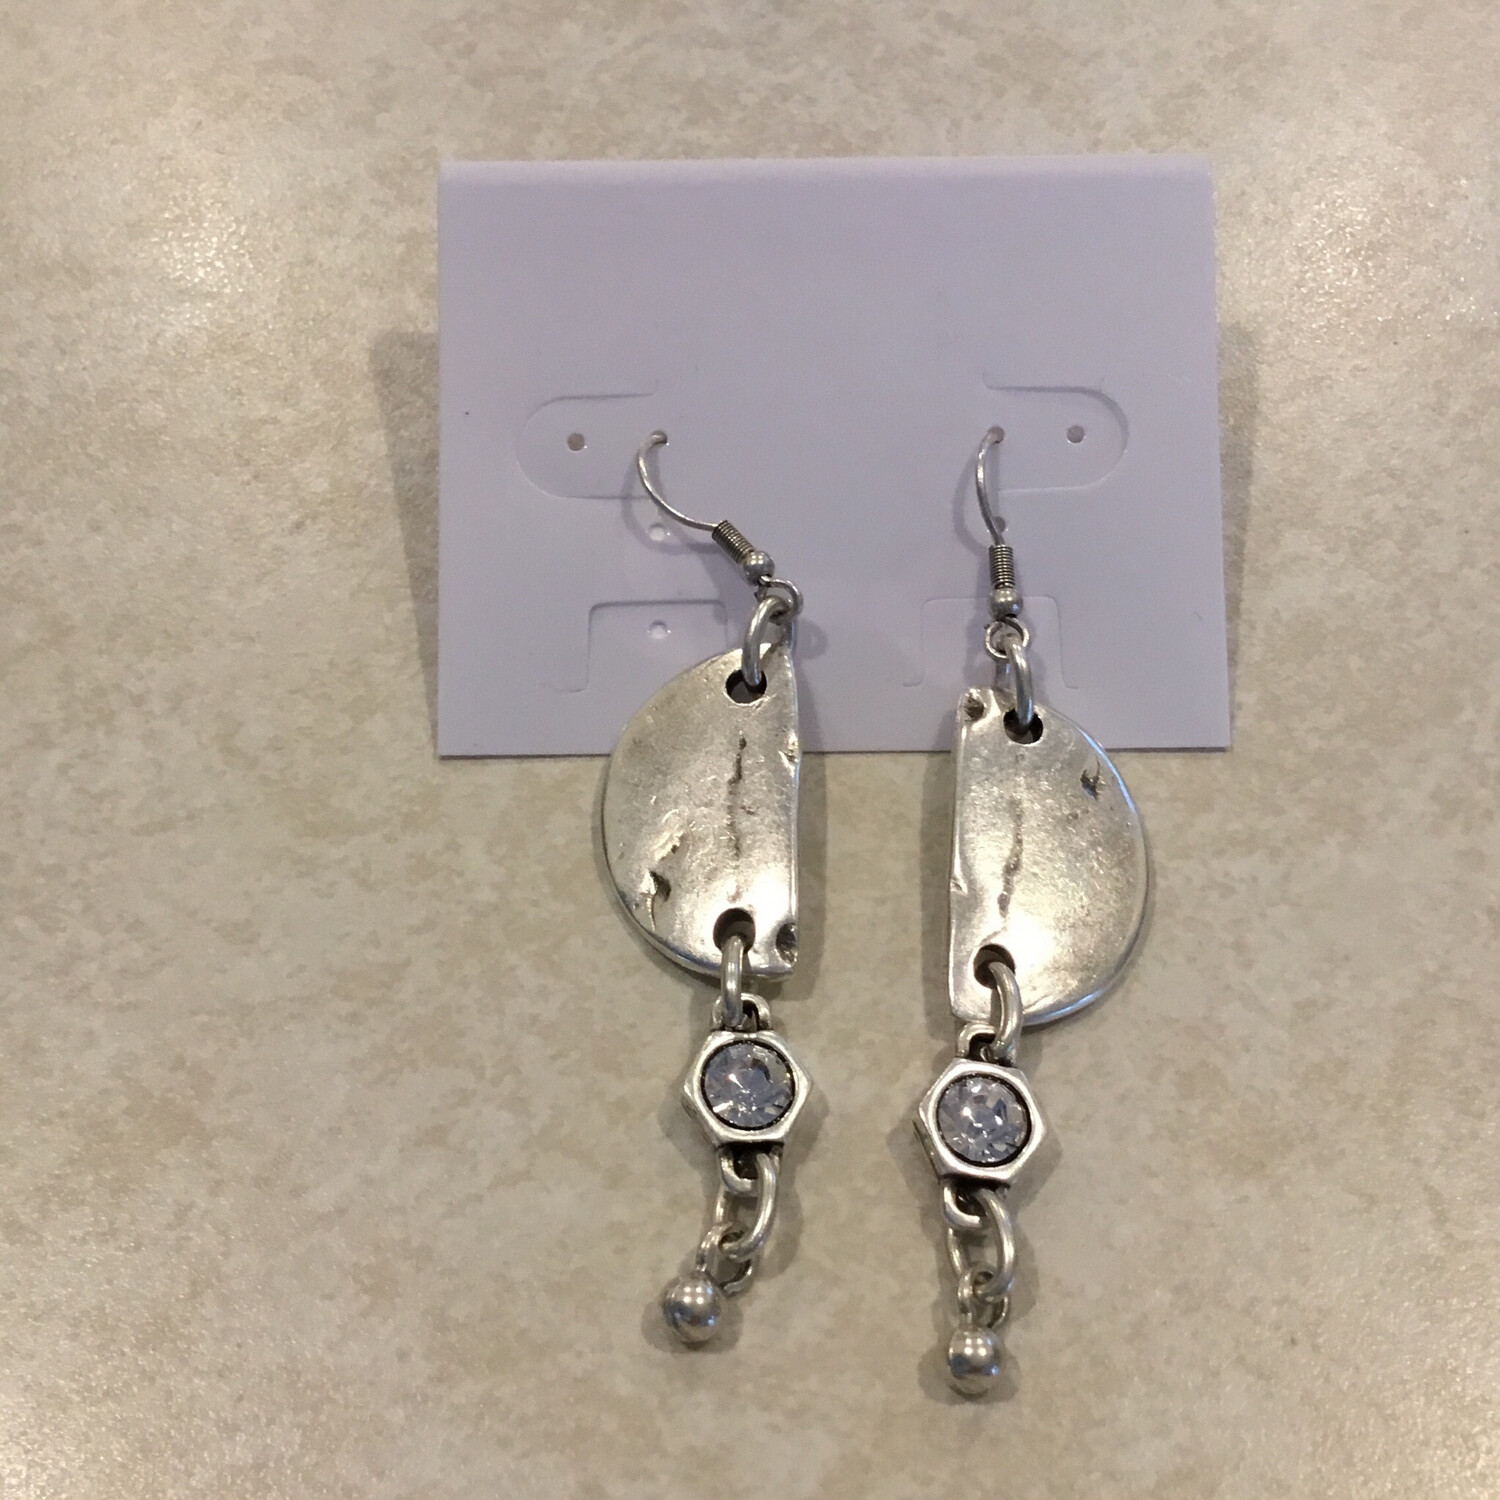 Handmade Pewter Earrings With French Hooks And Clear Crystal 1812